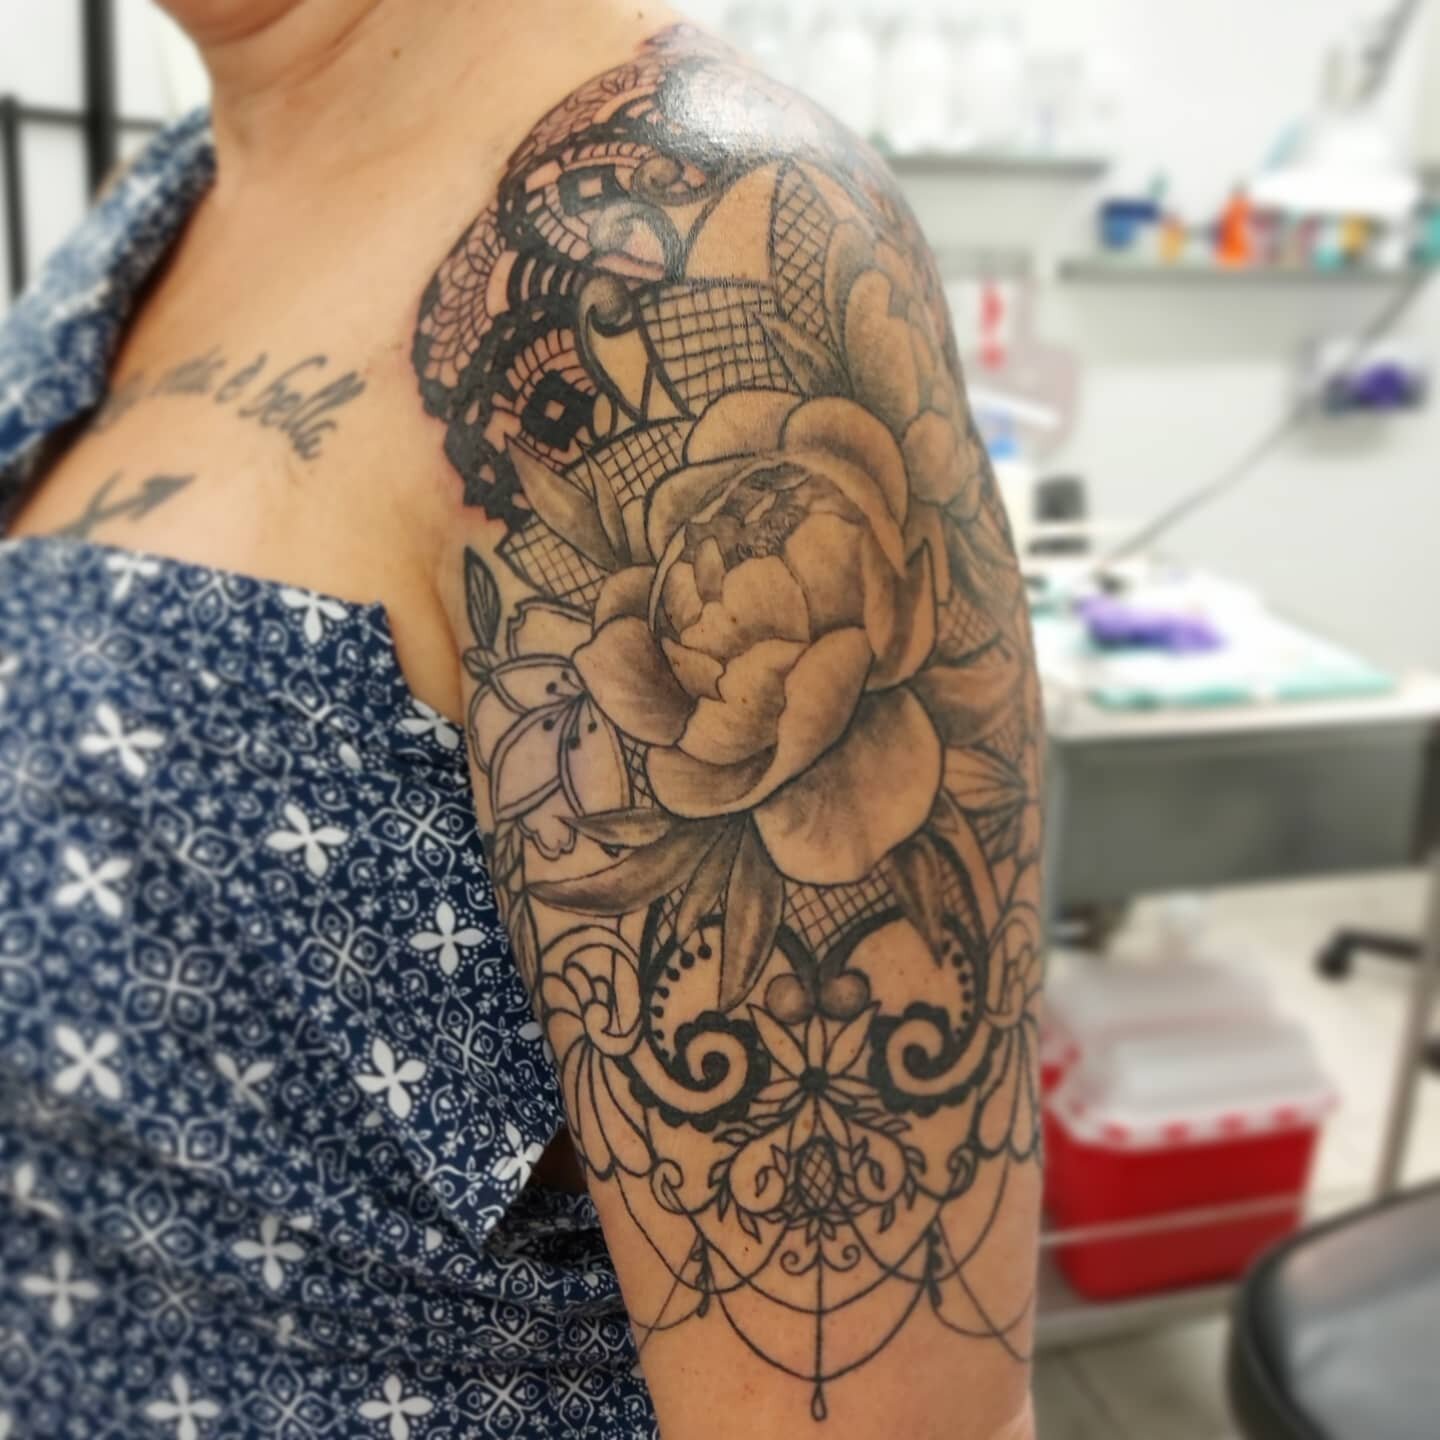 This lace is growing so organically. Like actual lace making. 😍
.
.
.
.
.

#ladytattooers #tattooartist #torontotattoo #tattootoronto #ink #inked #torontoink #416 #yyz #artist #torontoartist #drawing #instatattoo #instaink #tattoo #tattoos #tattoost